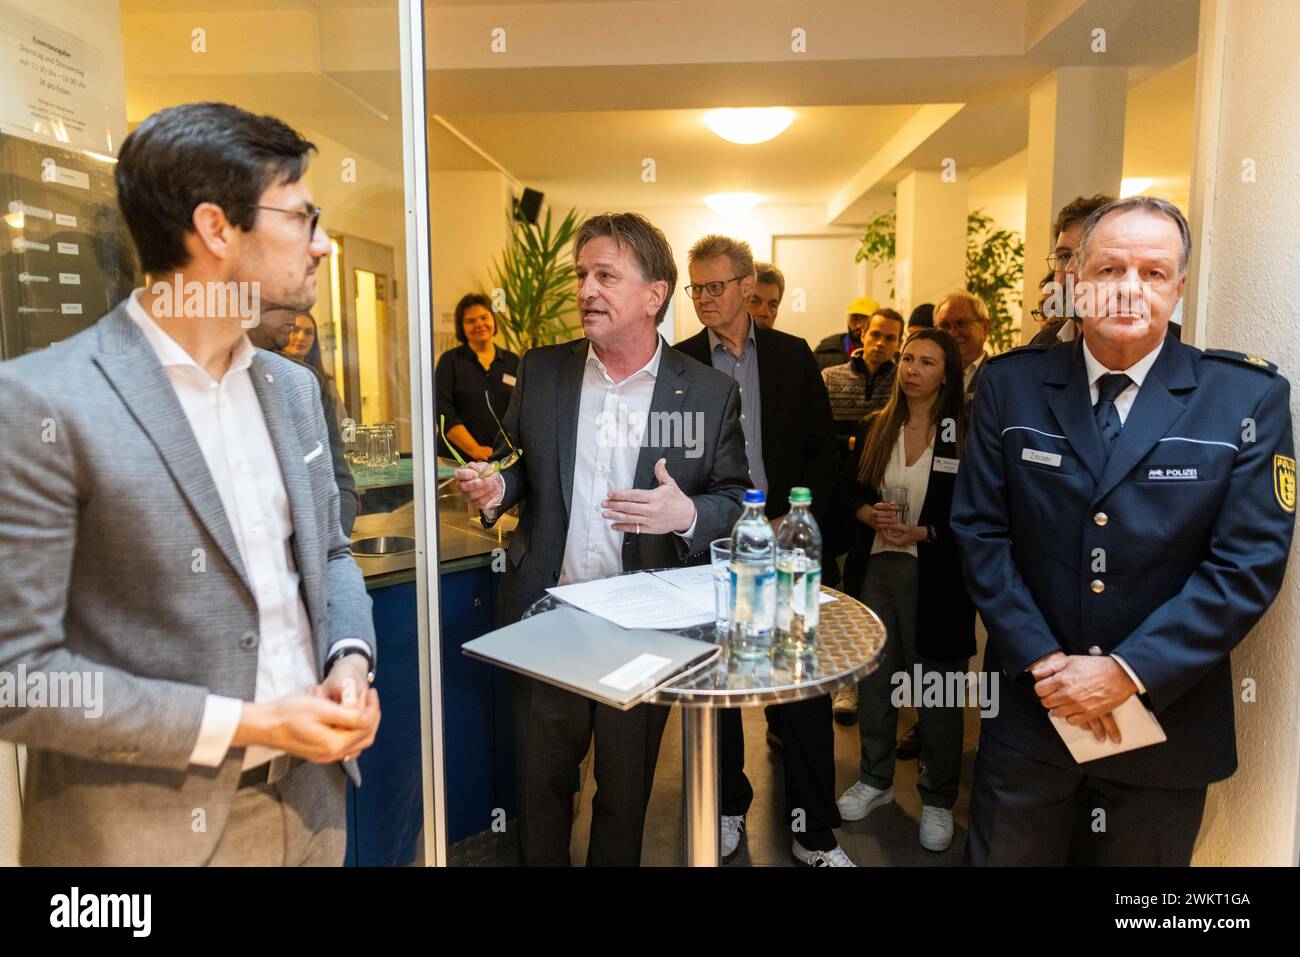 22 February 2024, Baden-Württemberg, Freiburg: Manfred 'Manne' Lucha (M, Alliance 90/The Greens), Minister for Social Affairs, Health and Integration of Baden-Württemberg, speaks during the opening of a drug consumption room. Standing next to him are Martin Horn (left, non-party), Lord Mayor of Freiburg, and Matthias Zeiser, Police Vice President of Freiburg Police Headquarters. According to the city, an average of around ten people die from overdoses in Freiburg every year. The city council wants to tackle this problem by setting up a drug consumption room. Photo: Philipp von Ditfurth/dpa Stock Photo